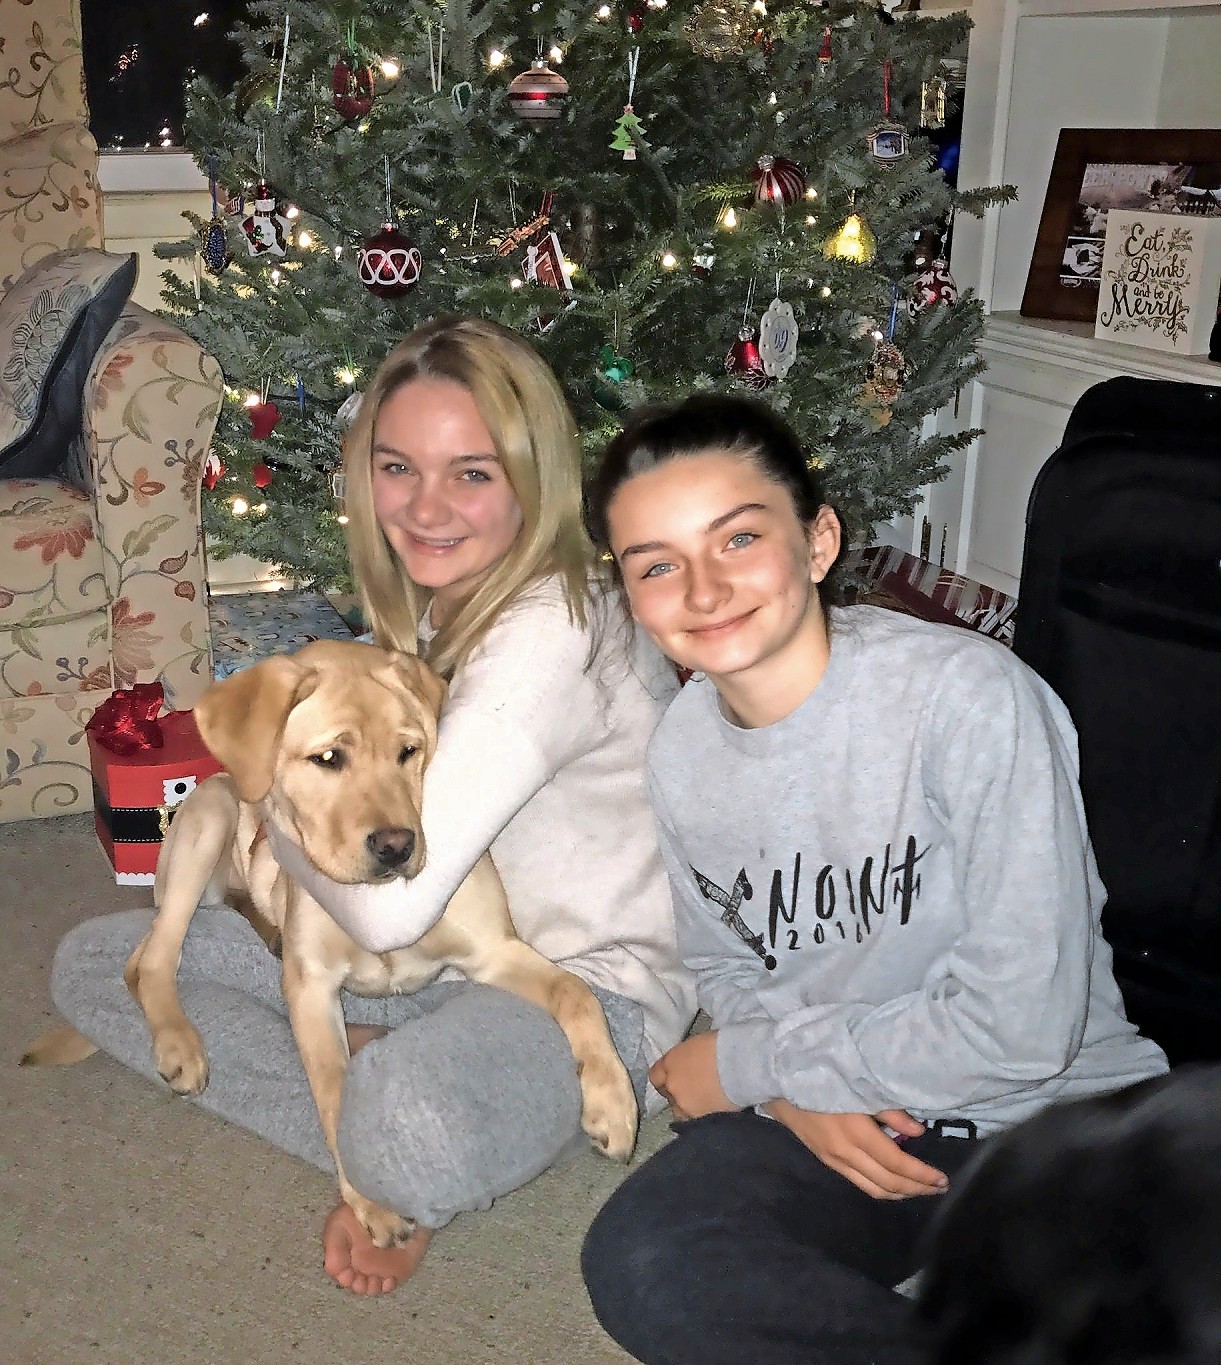 Morgan and Meredith Kass opened Christmas presents with their new Canine Companions dog, Zinger, in December.